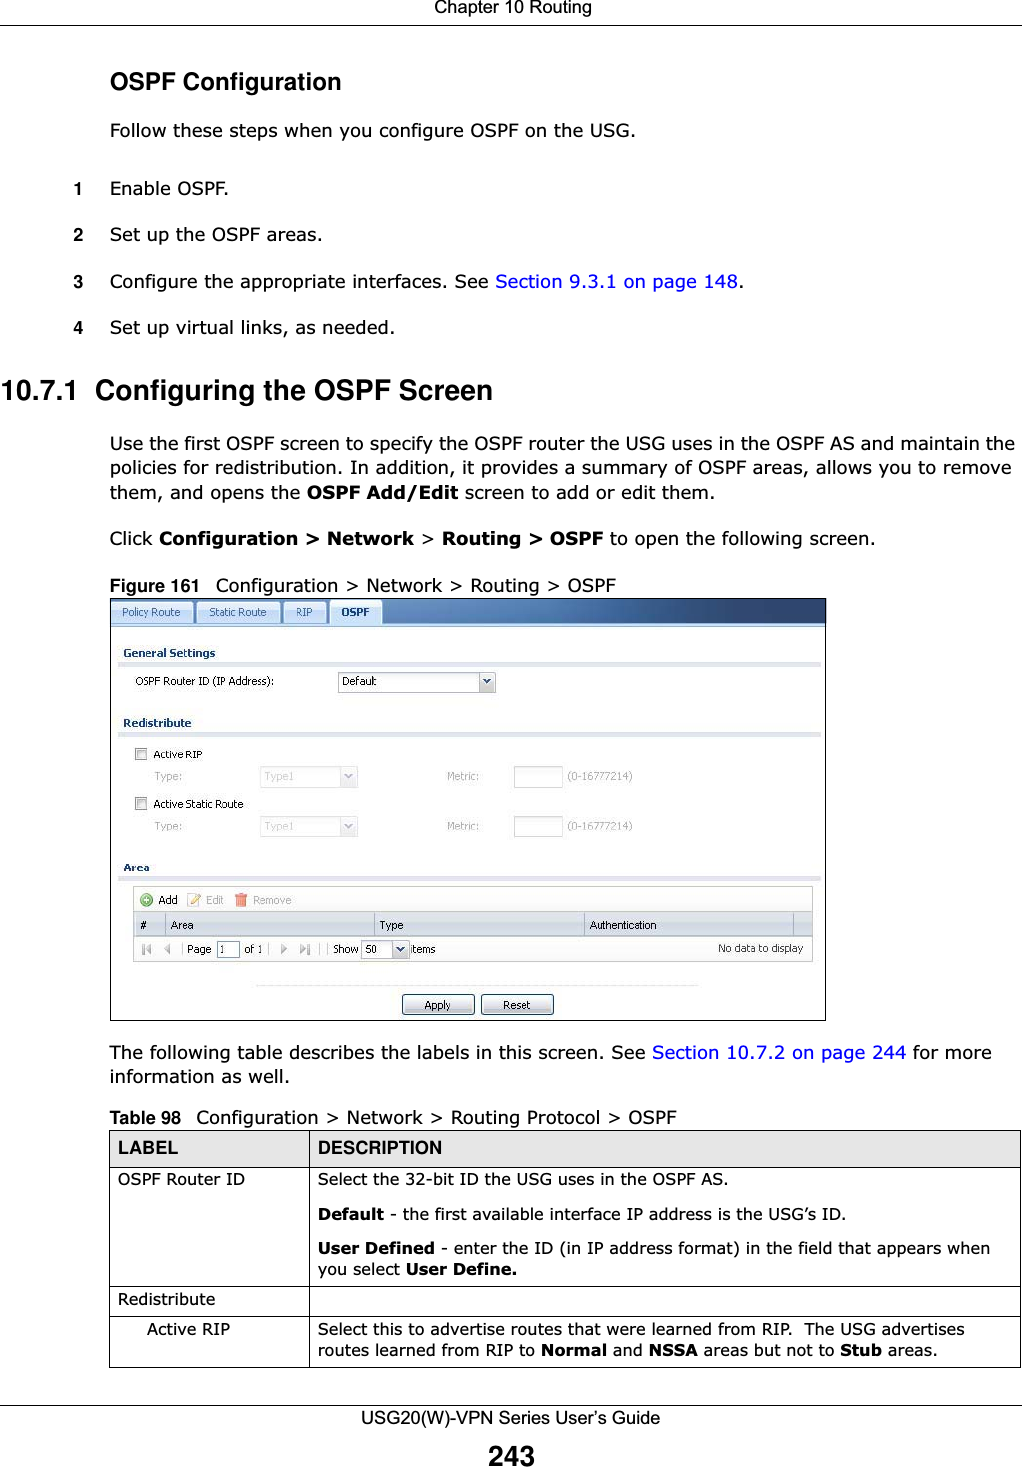  Chapter 10 RoutingUSG20(W)-VPN Series User’s Guide243OSPF ConfigurationFollow these steps when you configure OSPF on the USG.1Enable OSPF.2Set up the OSPF areas.3Configure the appropriate interfaces. See Section 9.3.1 on page 148.4Set up virtual links, as needed.10.7.1  Configuring the OSPF ScreenUse the first OSPF screen to specify the OSPF router the USG uses in the OSPF AS and maintain the policies for redistribution. In addition, it provides a summary of OSPF areas, allows you to remove them, and opens the OSPF Add/Edit screen to add or edit them.Click Configuration &gt; Network &gt; Routing &gt; OSPF to open the following screen.Figure 161   Configuration &gt; Network &gt; Routing &gt; OSPFThe following table describes the labels in this screen. See Section 10.7.2 on page 244 for more information as well.  Table 98   Configuration &gt; Network &gt; Routing Protocol &gt; OSPFLABEL DESCRIPTIONOSPF Router ID Select the 32-bit ID the USG uses in the OSPF AS.Default - the first available interface IP address is the USG’s ID.User Defined - enter the ID (in IP address format) in the field that appears when you select User Define.RedistributeActive RIP Select this to advertise routes that were learned from RIP.  The USG advertises routes learned from RIP to Normal and NSSA areas but not to Stub areas.